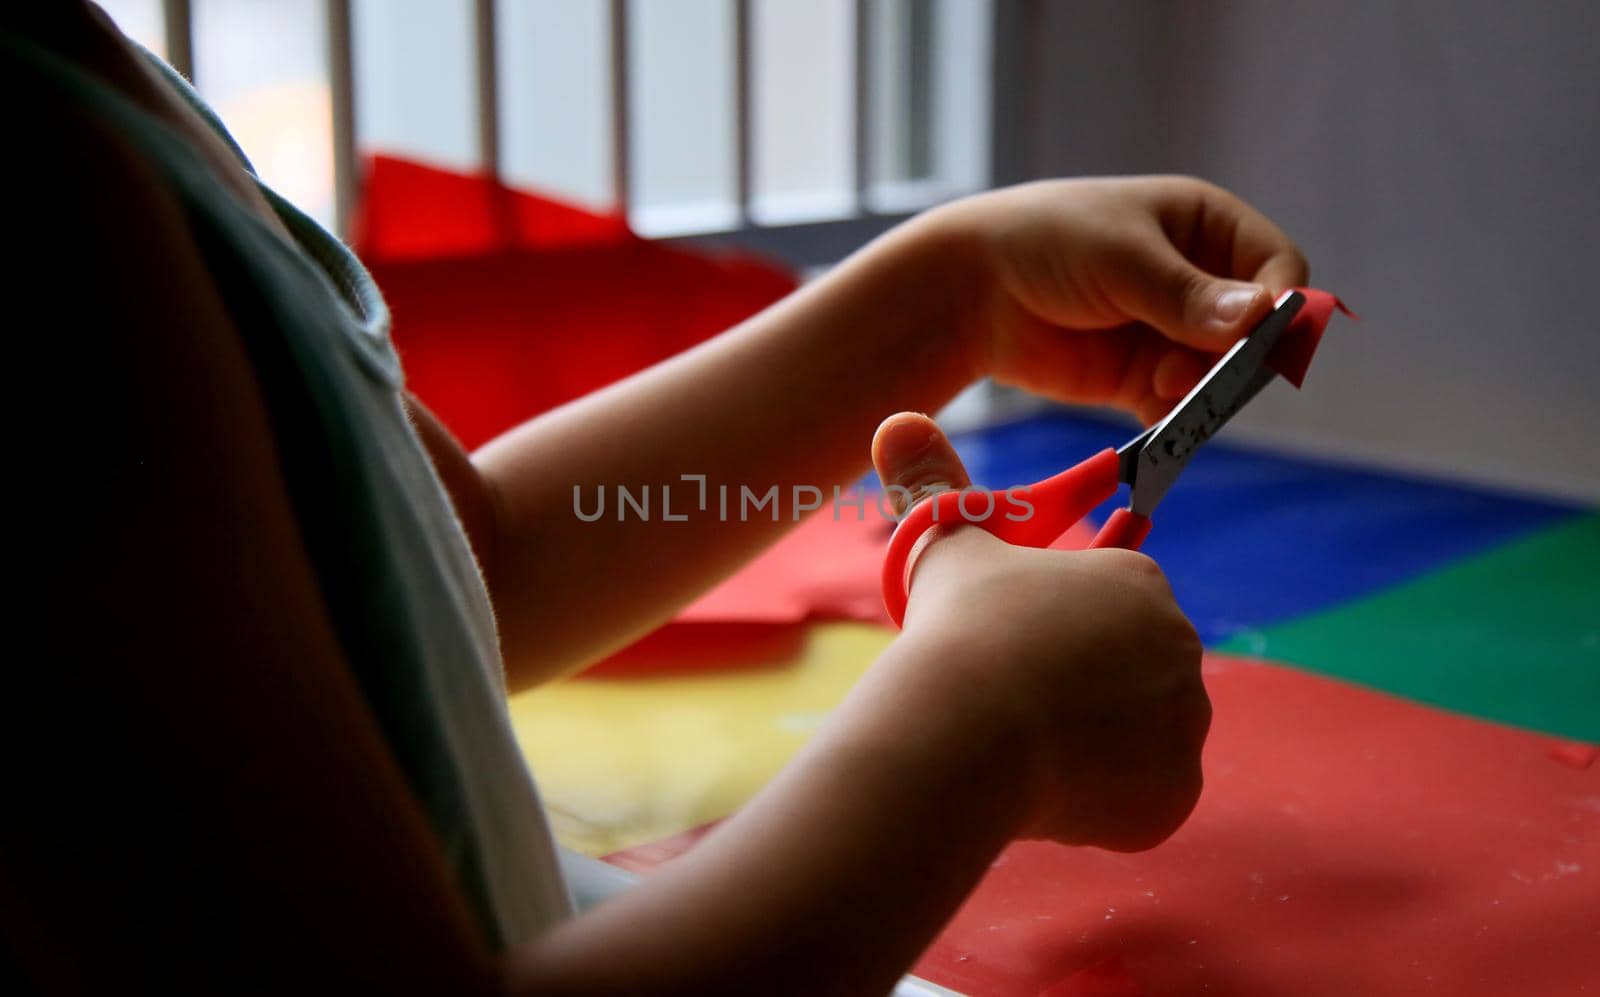 salvador, bahia / brazil - may 18, 2020: child is seen using scissors to cut paper during school assignment.
